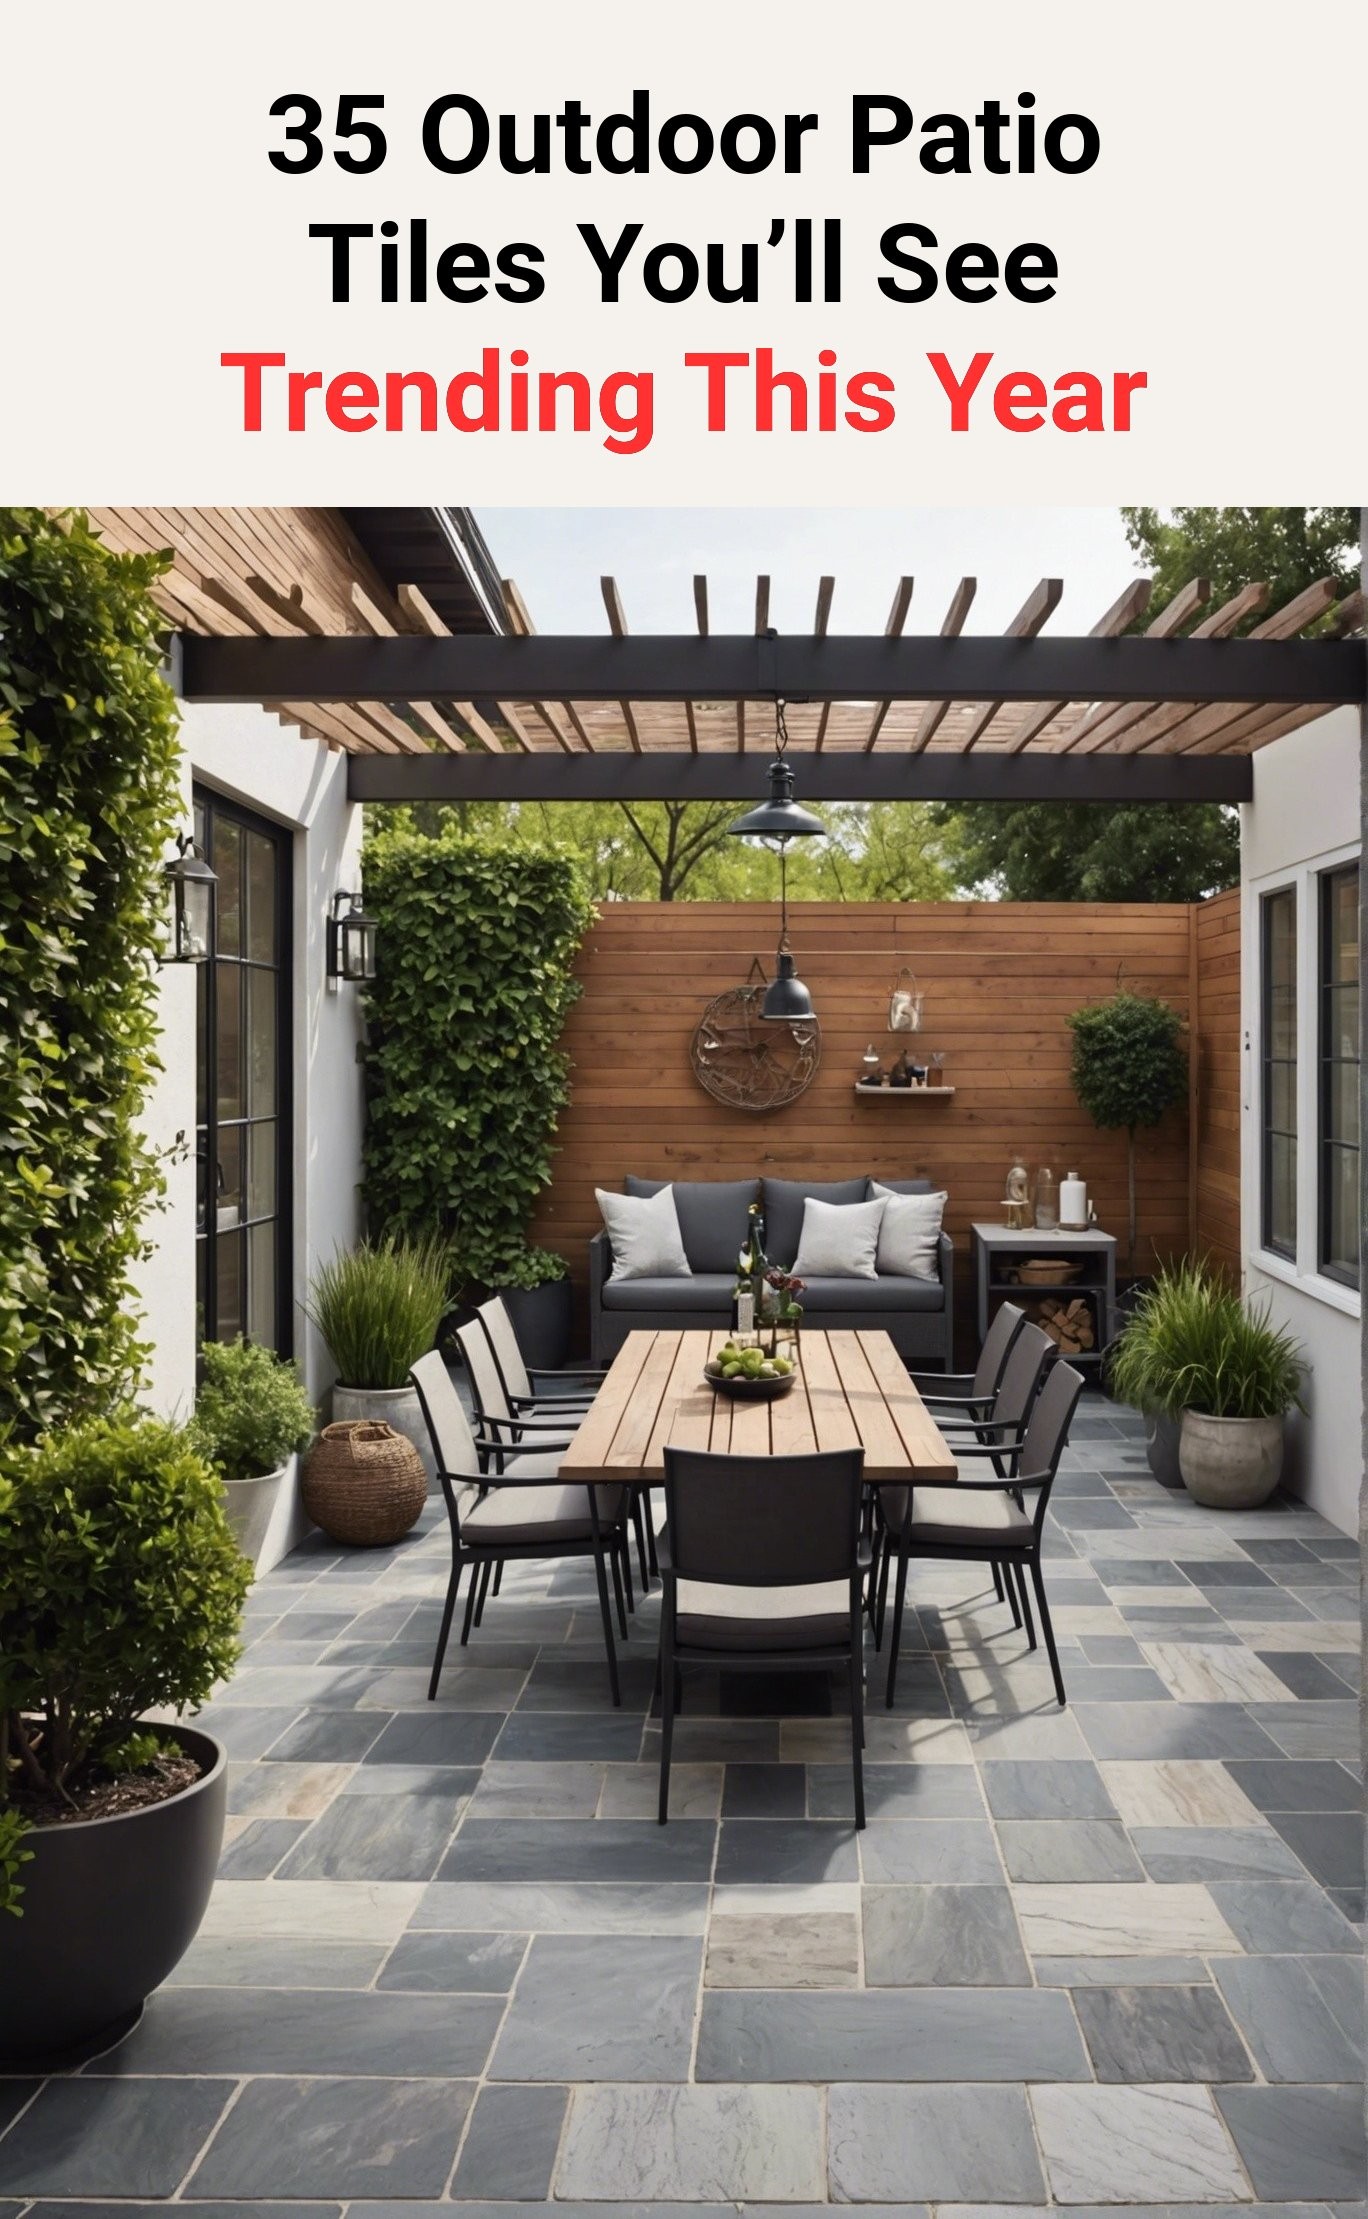 35 Outdoor Patio Tiles You’ll See Trending This Year